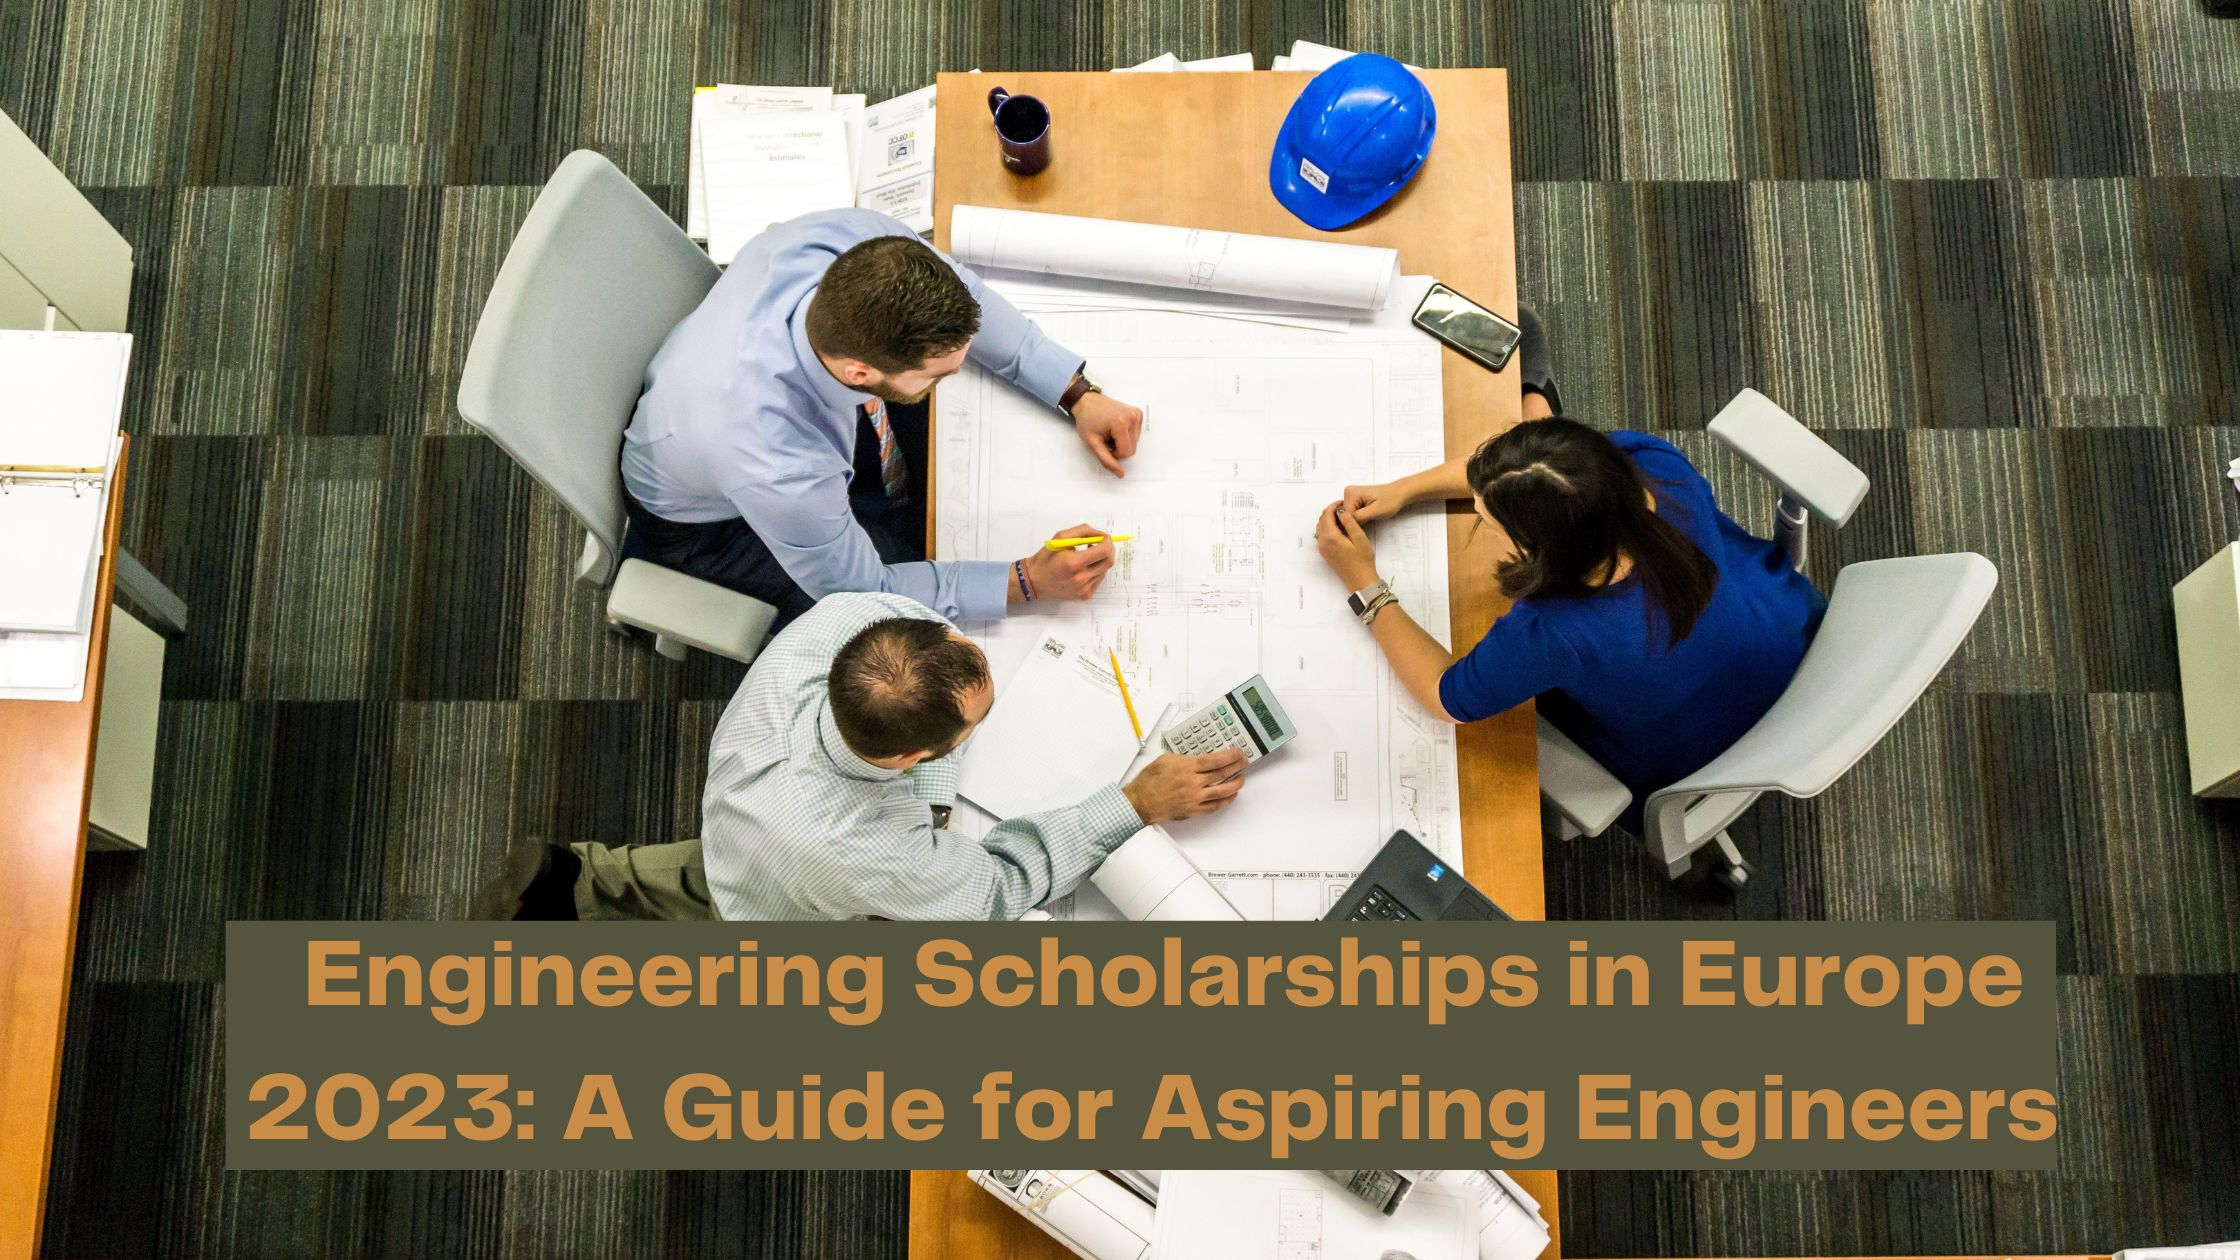 Engineering Scholarships in Europe 2023: A Guide for Aspiring Engineers